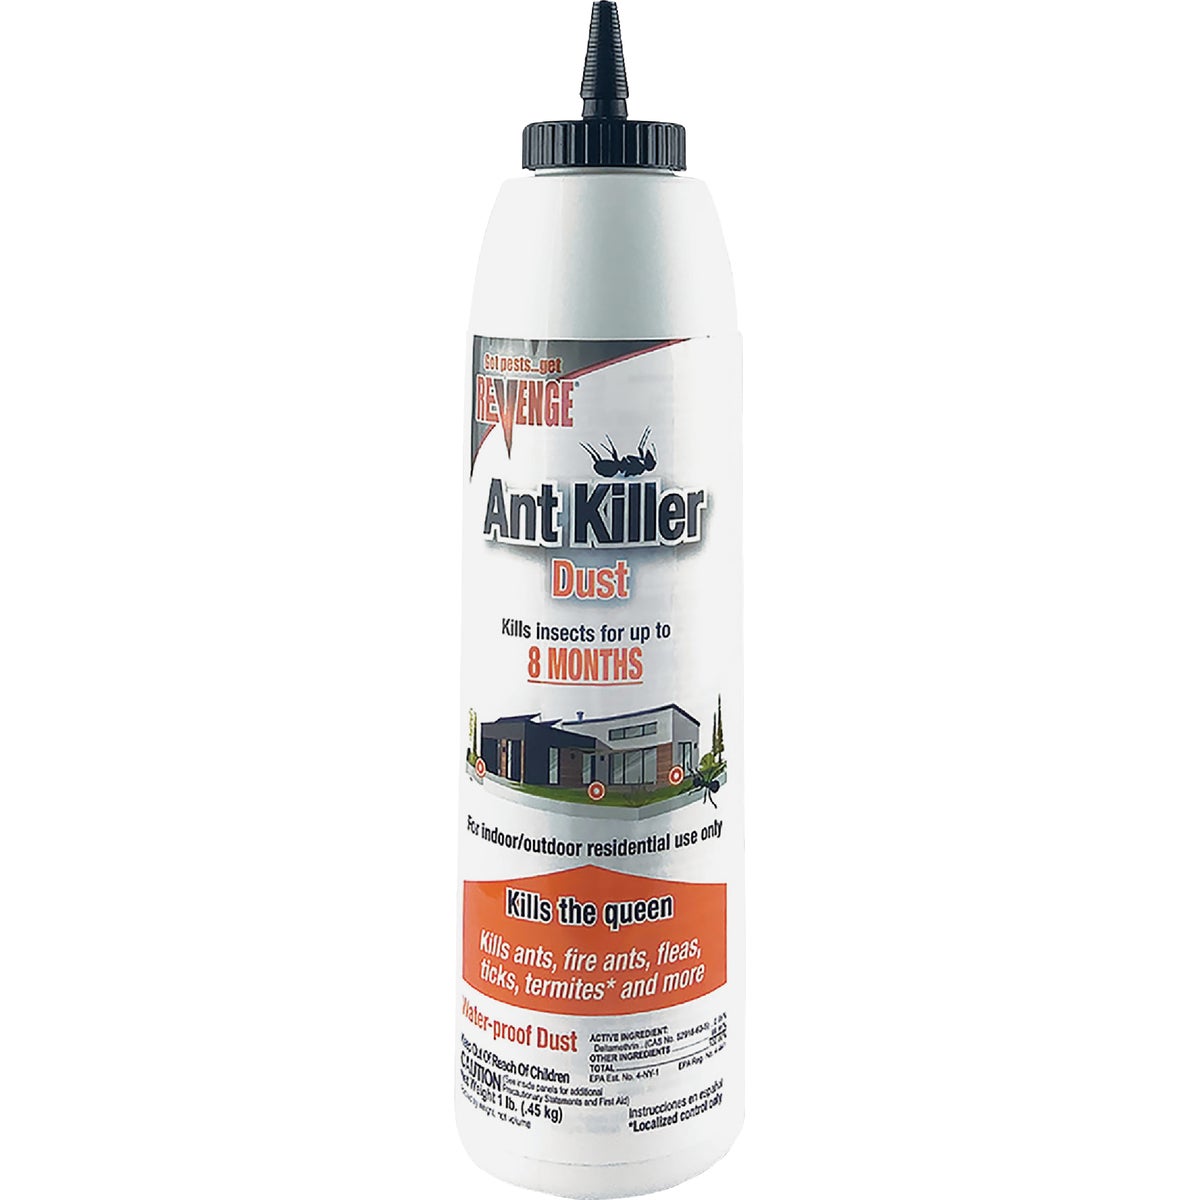 Item 765643, Revenge Ant Killer Dust kills a variety of insects including ants, fire 